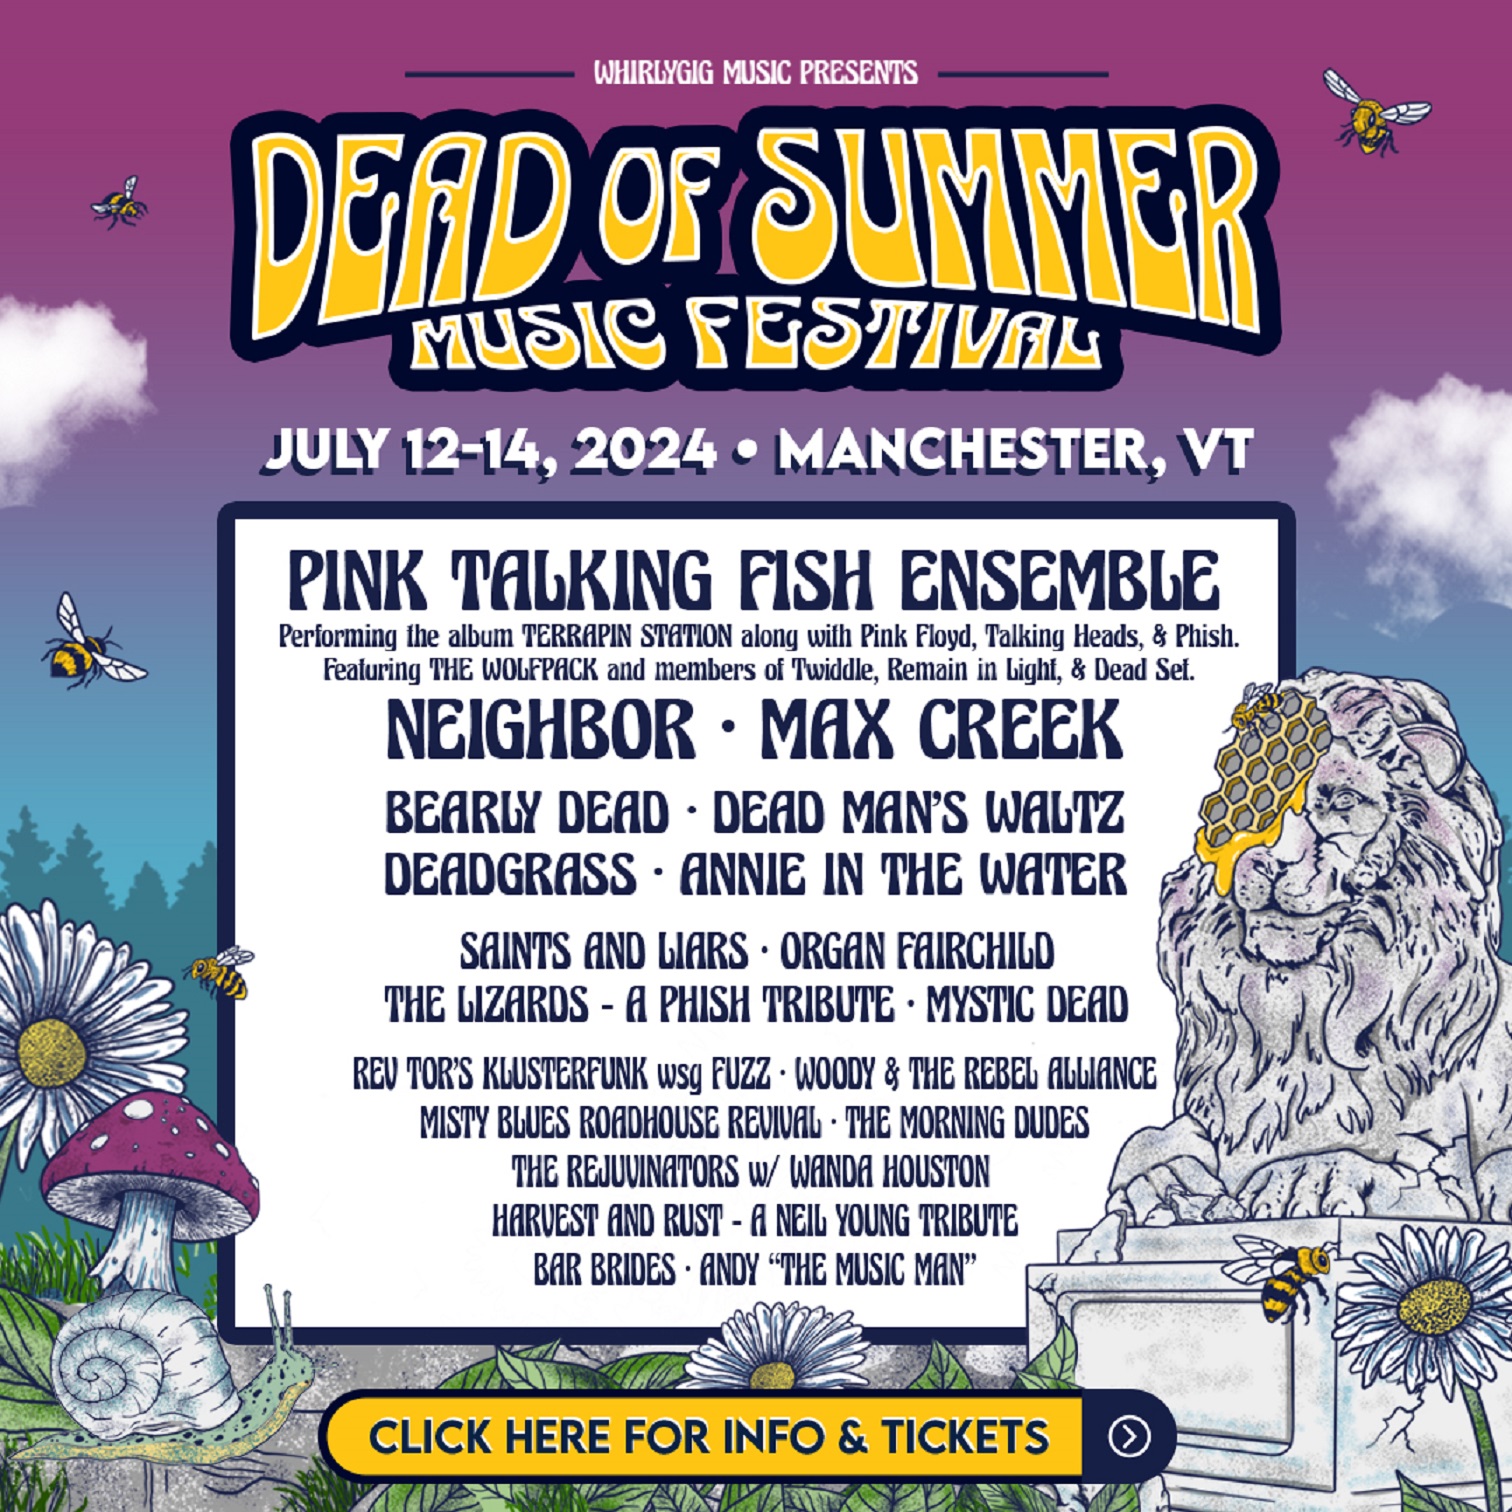 Whirlygig Music proudly presents the 5th Dead of Summer Music Festival, happening July 12-14, 2024, in Manchester, Vermont